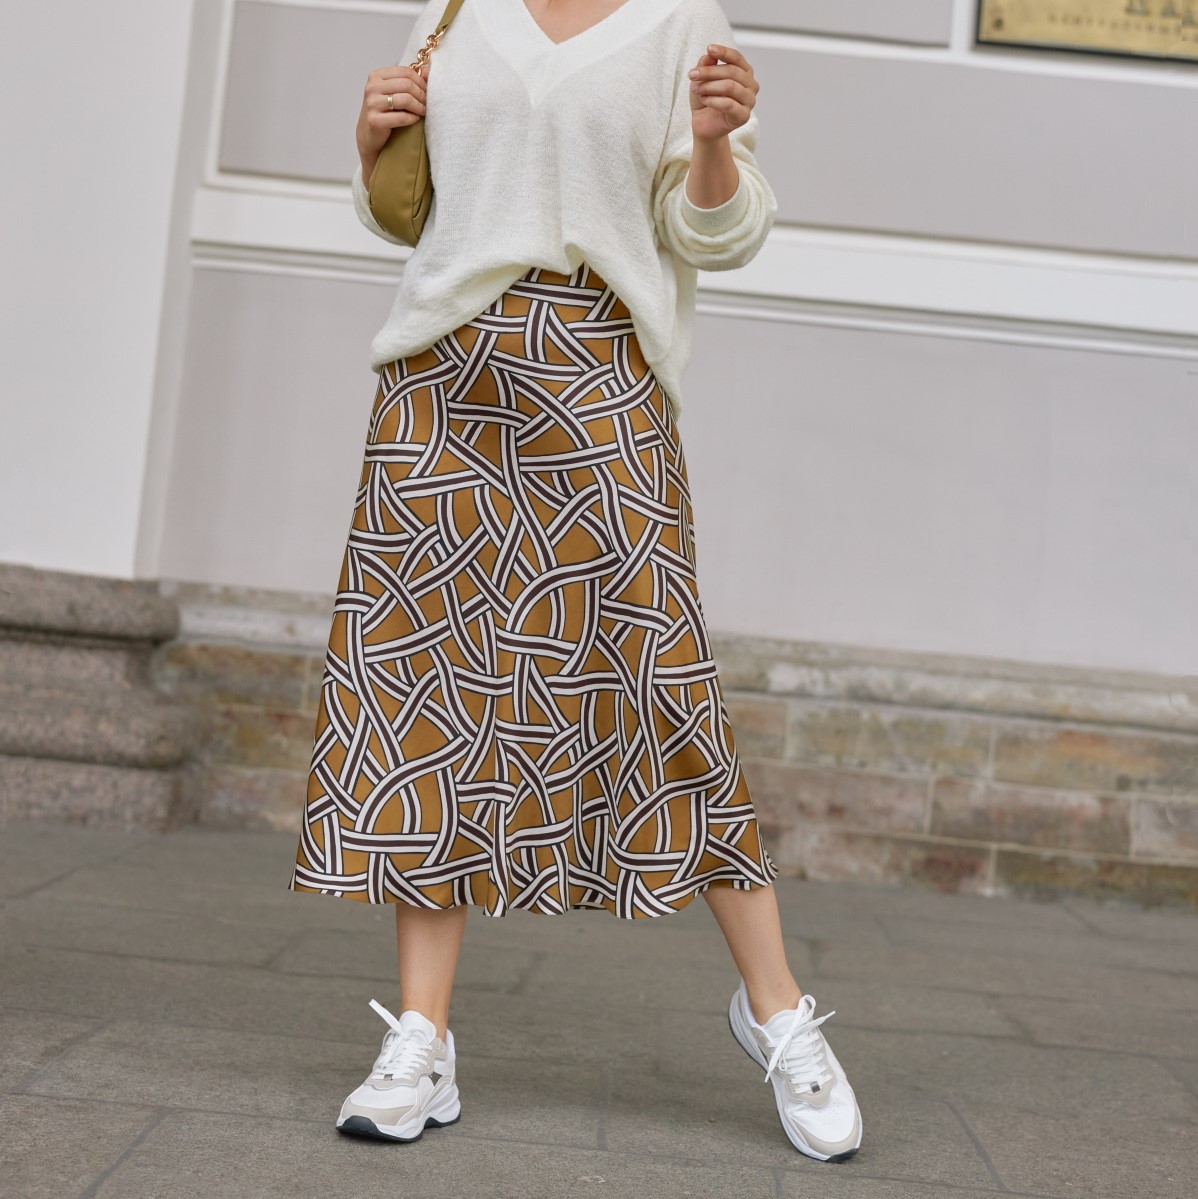 Comfy Patterned Trousers - Free sewing patterns - Sew Magazine